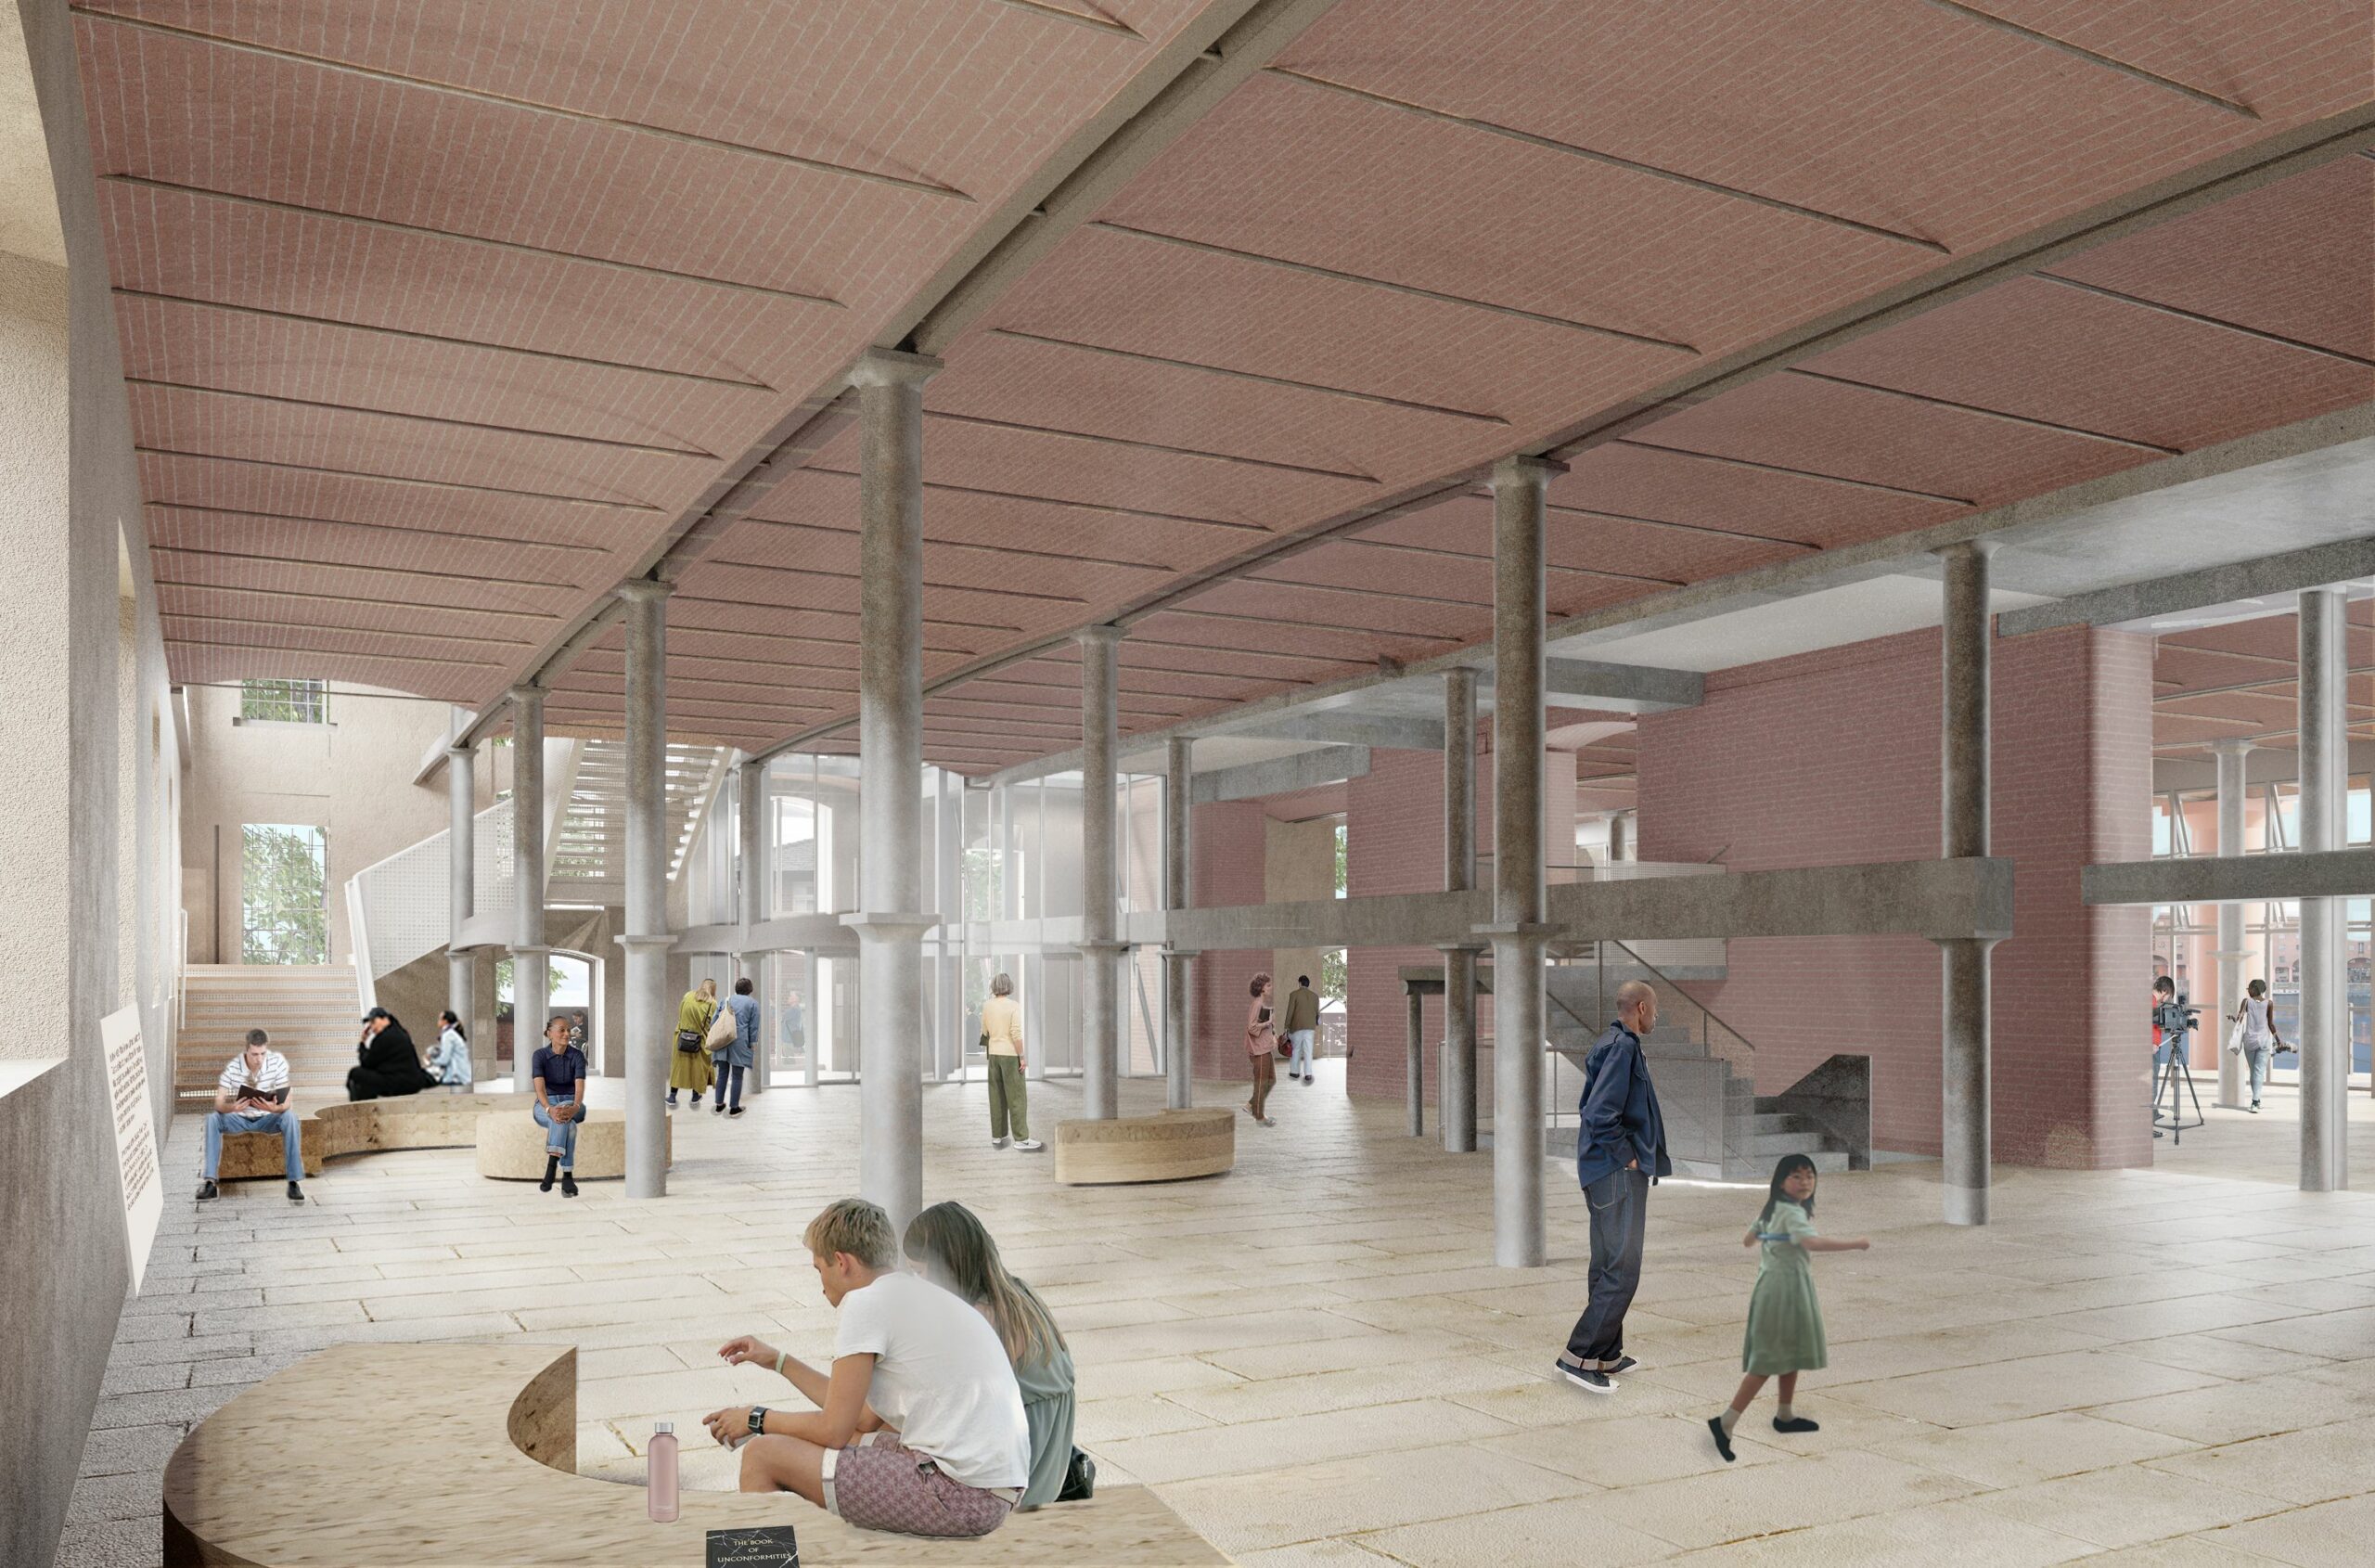 Preliminary designs revealed for Tate Liverpool transformation